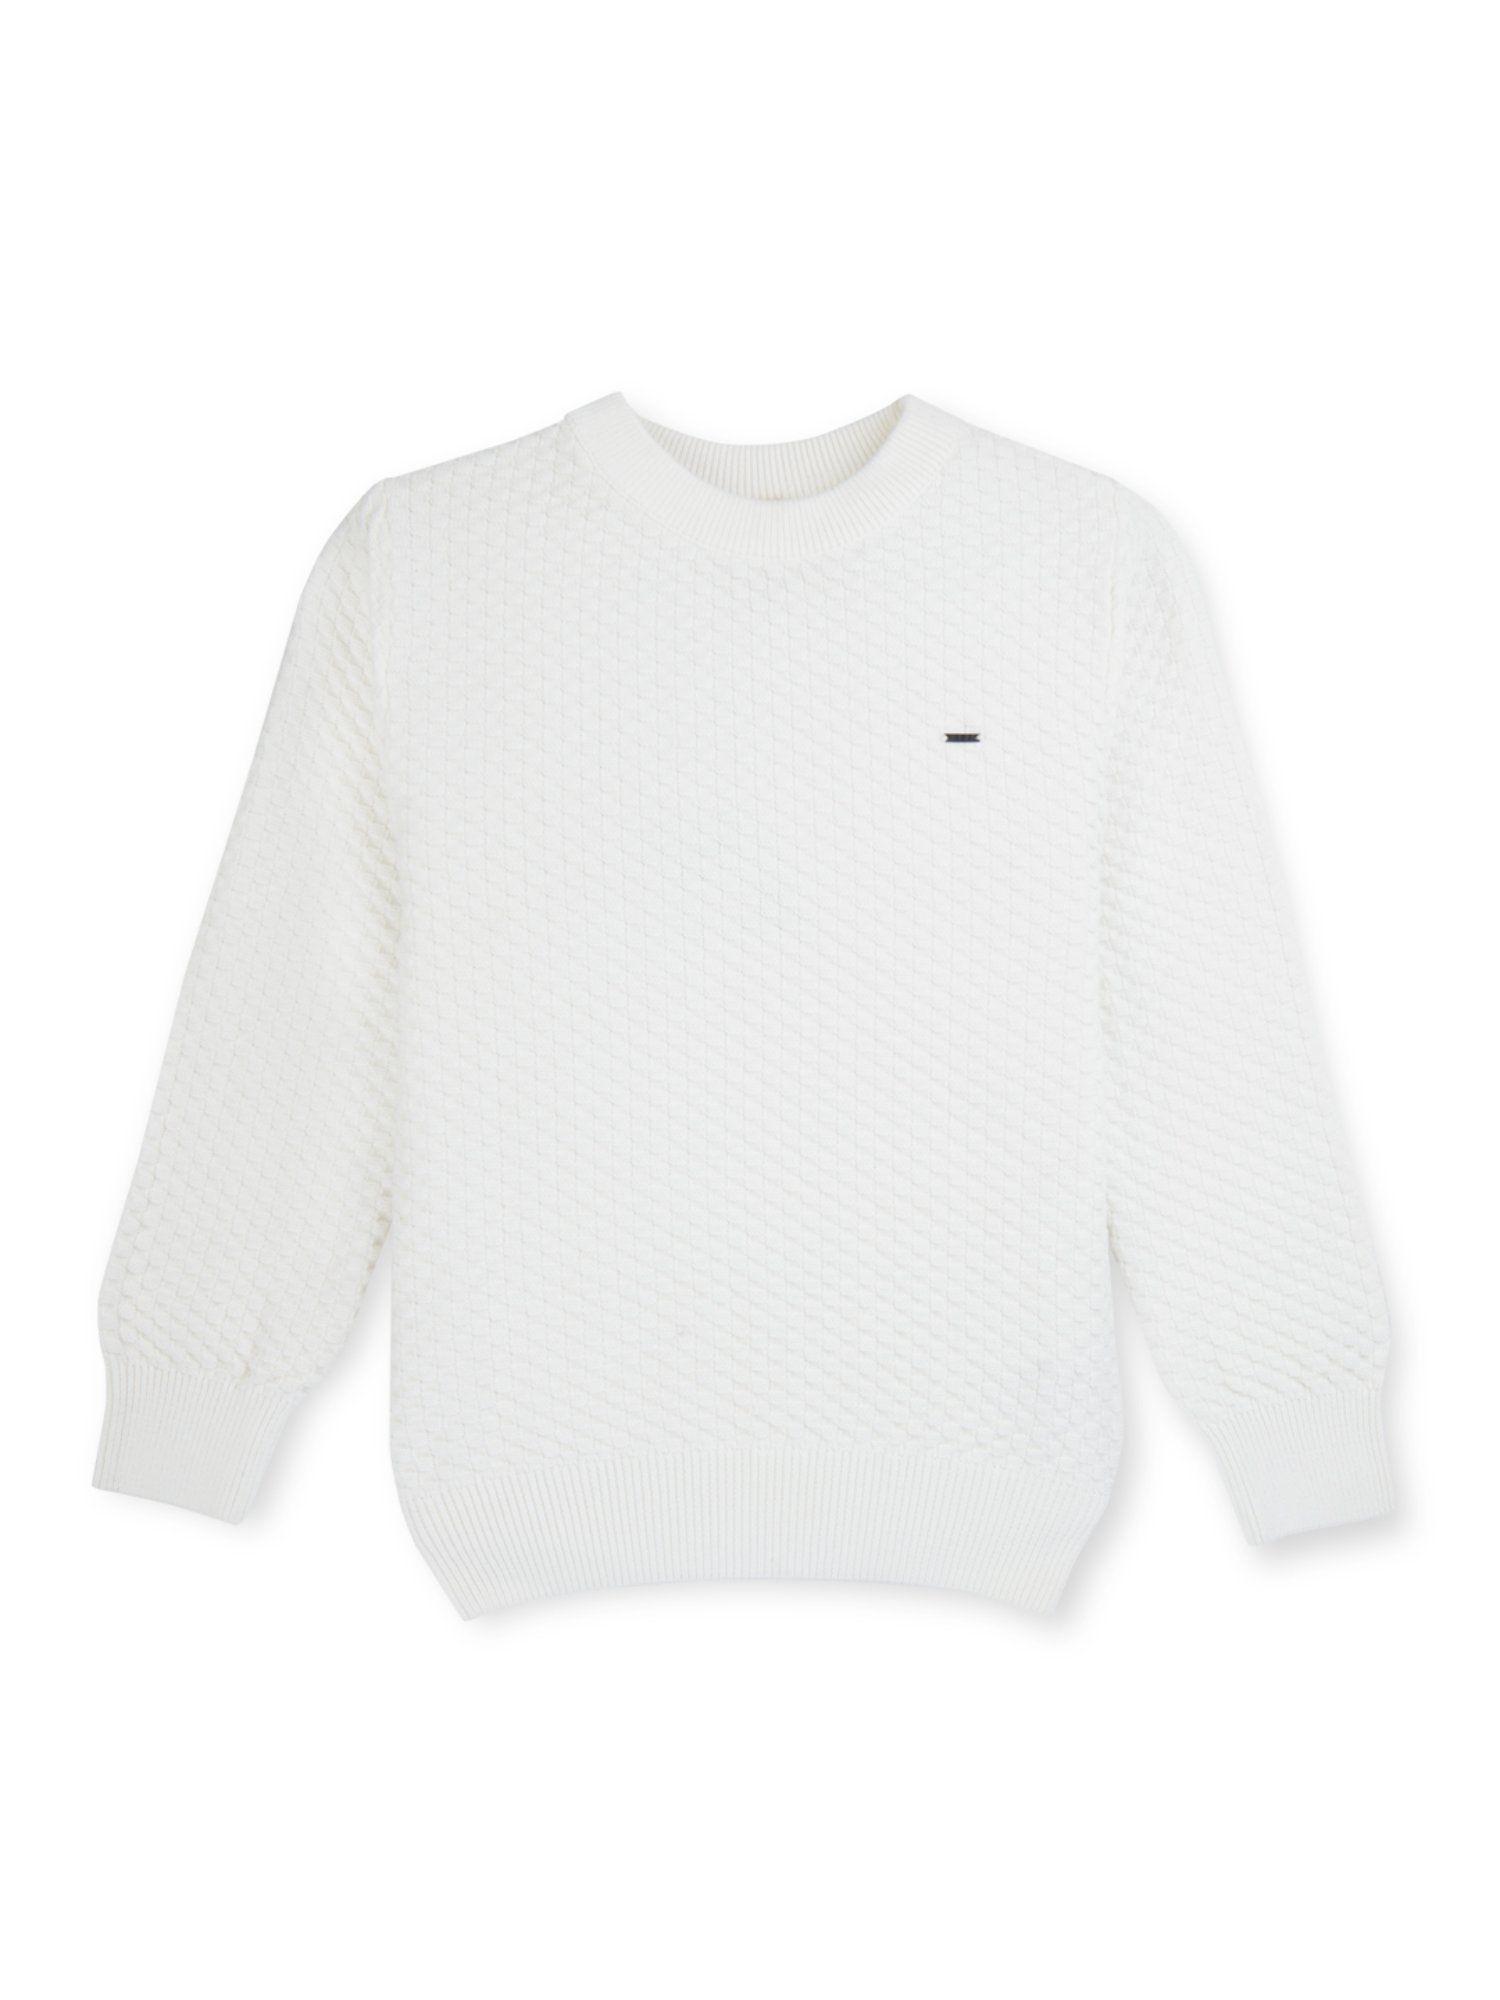 boys white solid cotton full sleeves sweater